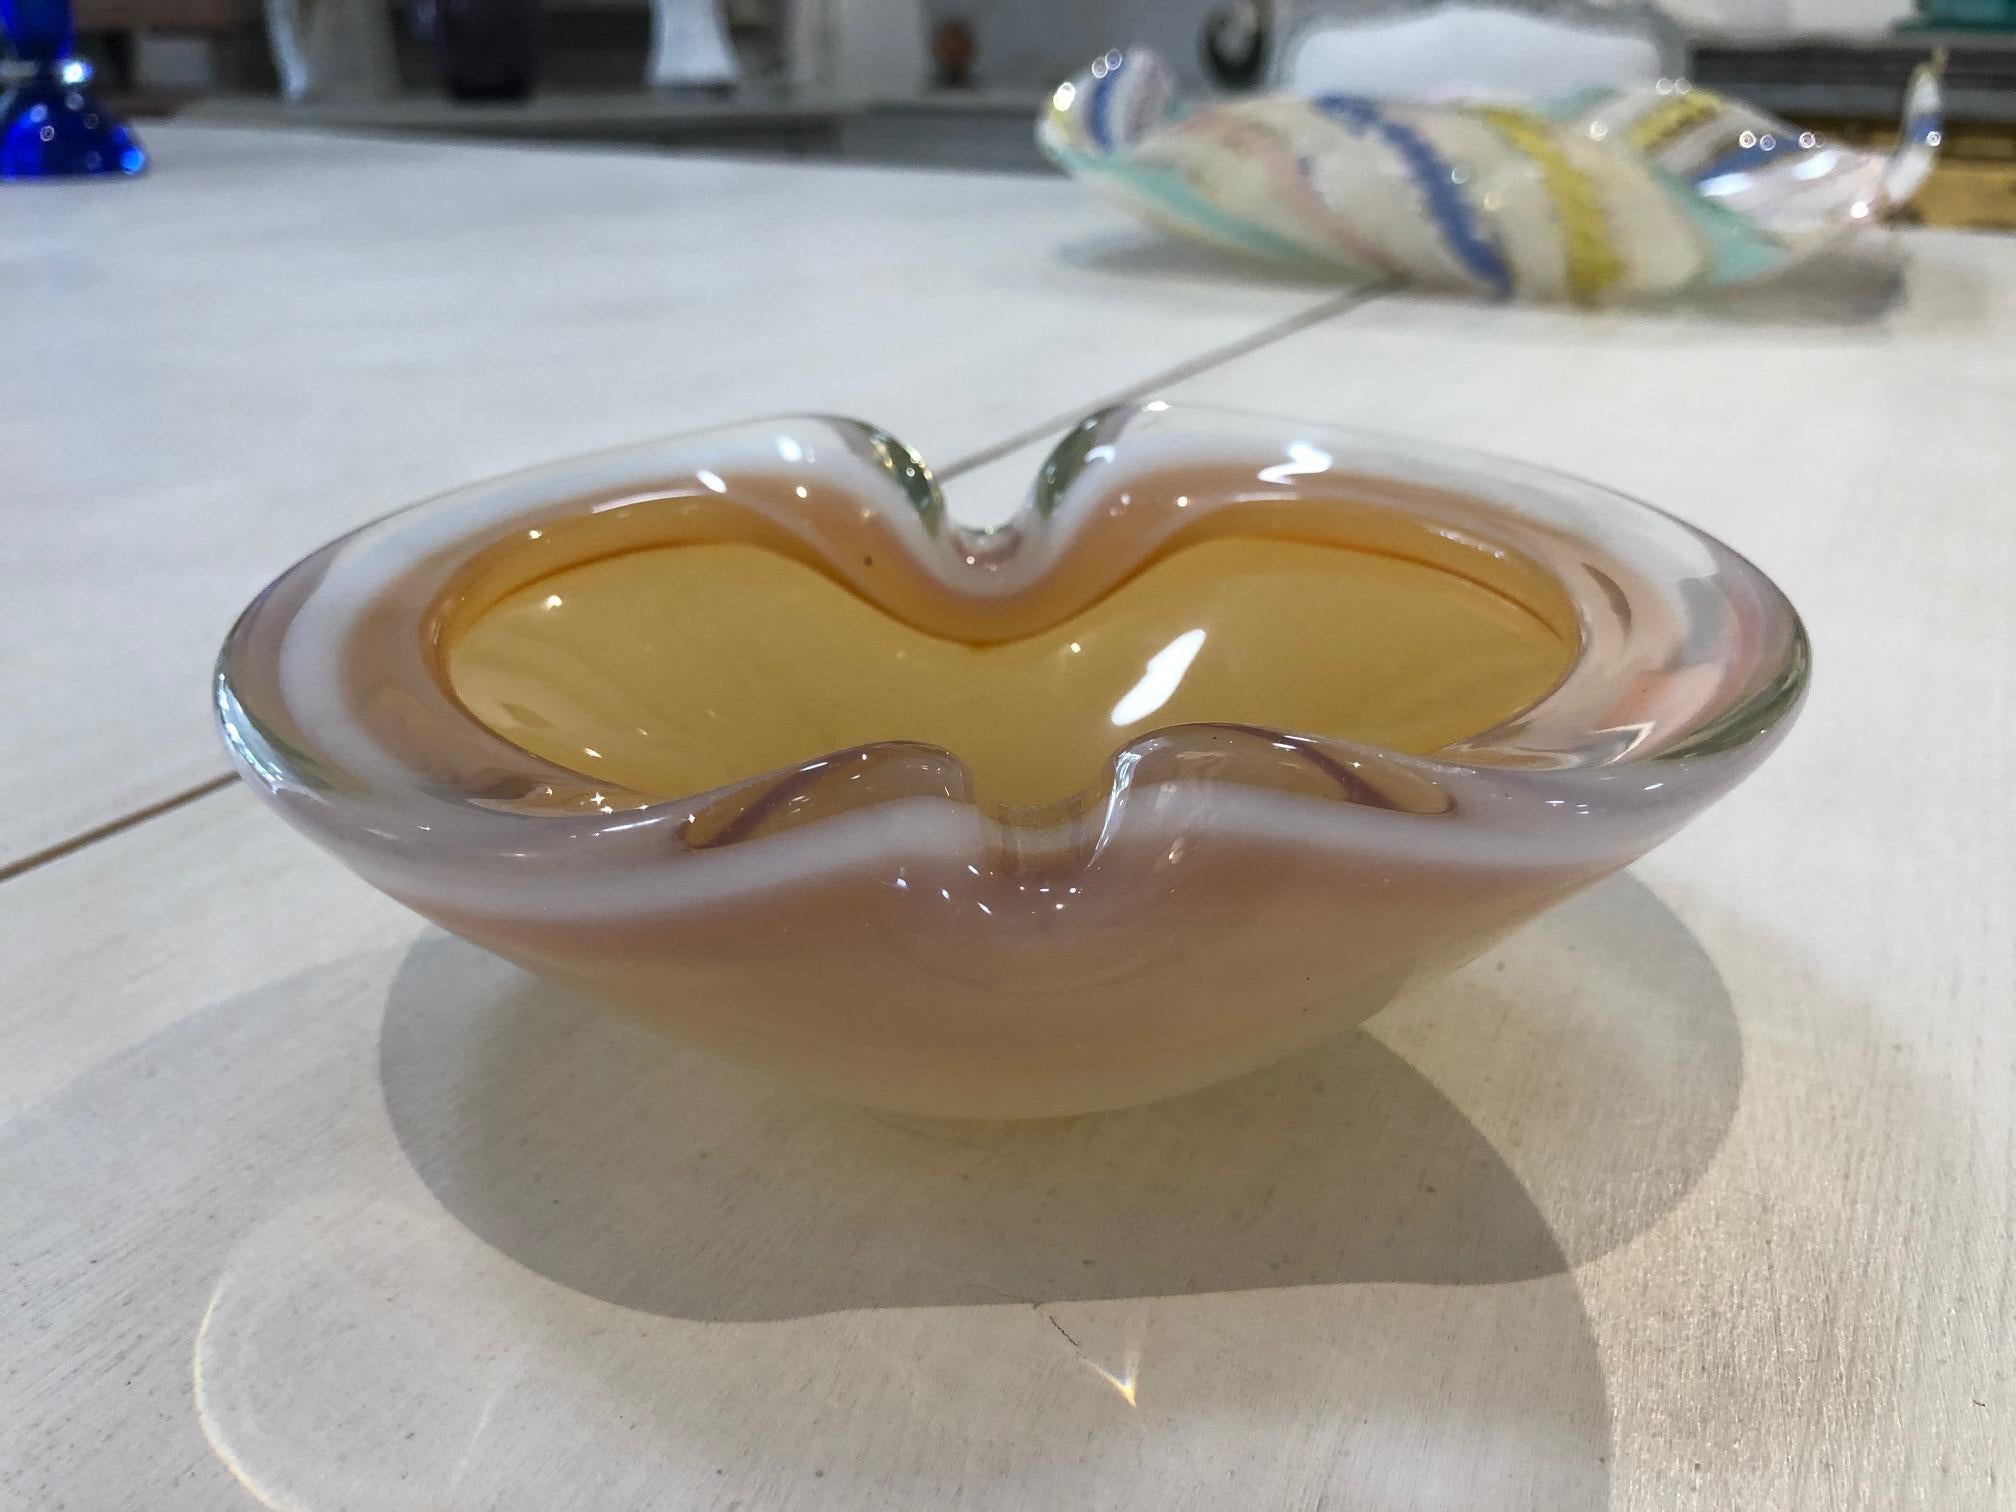 Fratelli Toso organic form butterscotch color bowl, circa 1960s. Bowl is unmarked. Excellent condition. No cracks or chips. Minor scratches on the base. Heavy glass.

Bowl measures (inches):
6.5